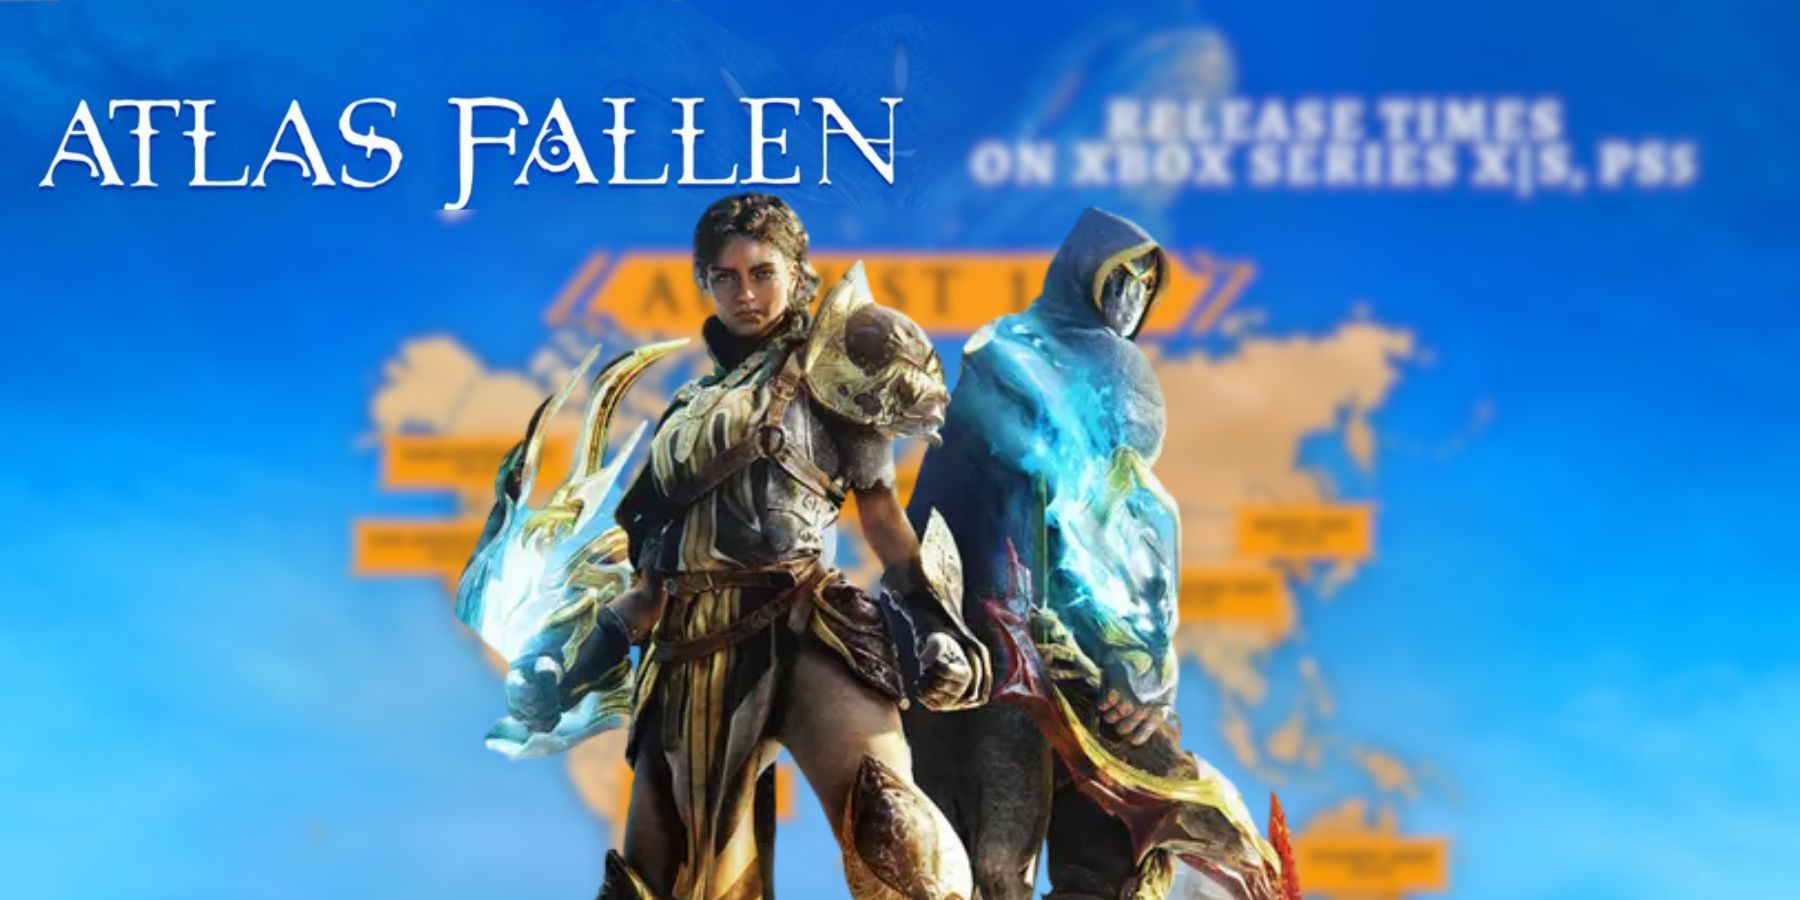 atlas fallen release date and time